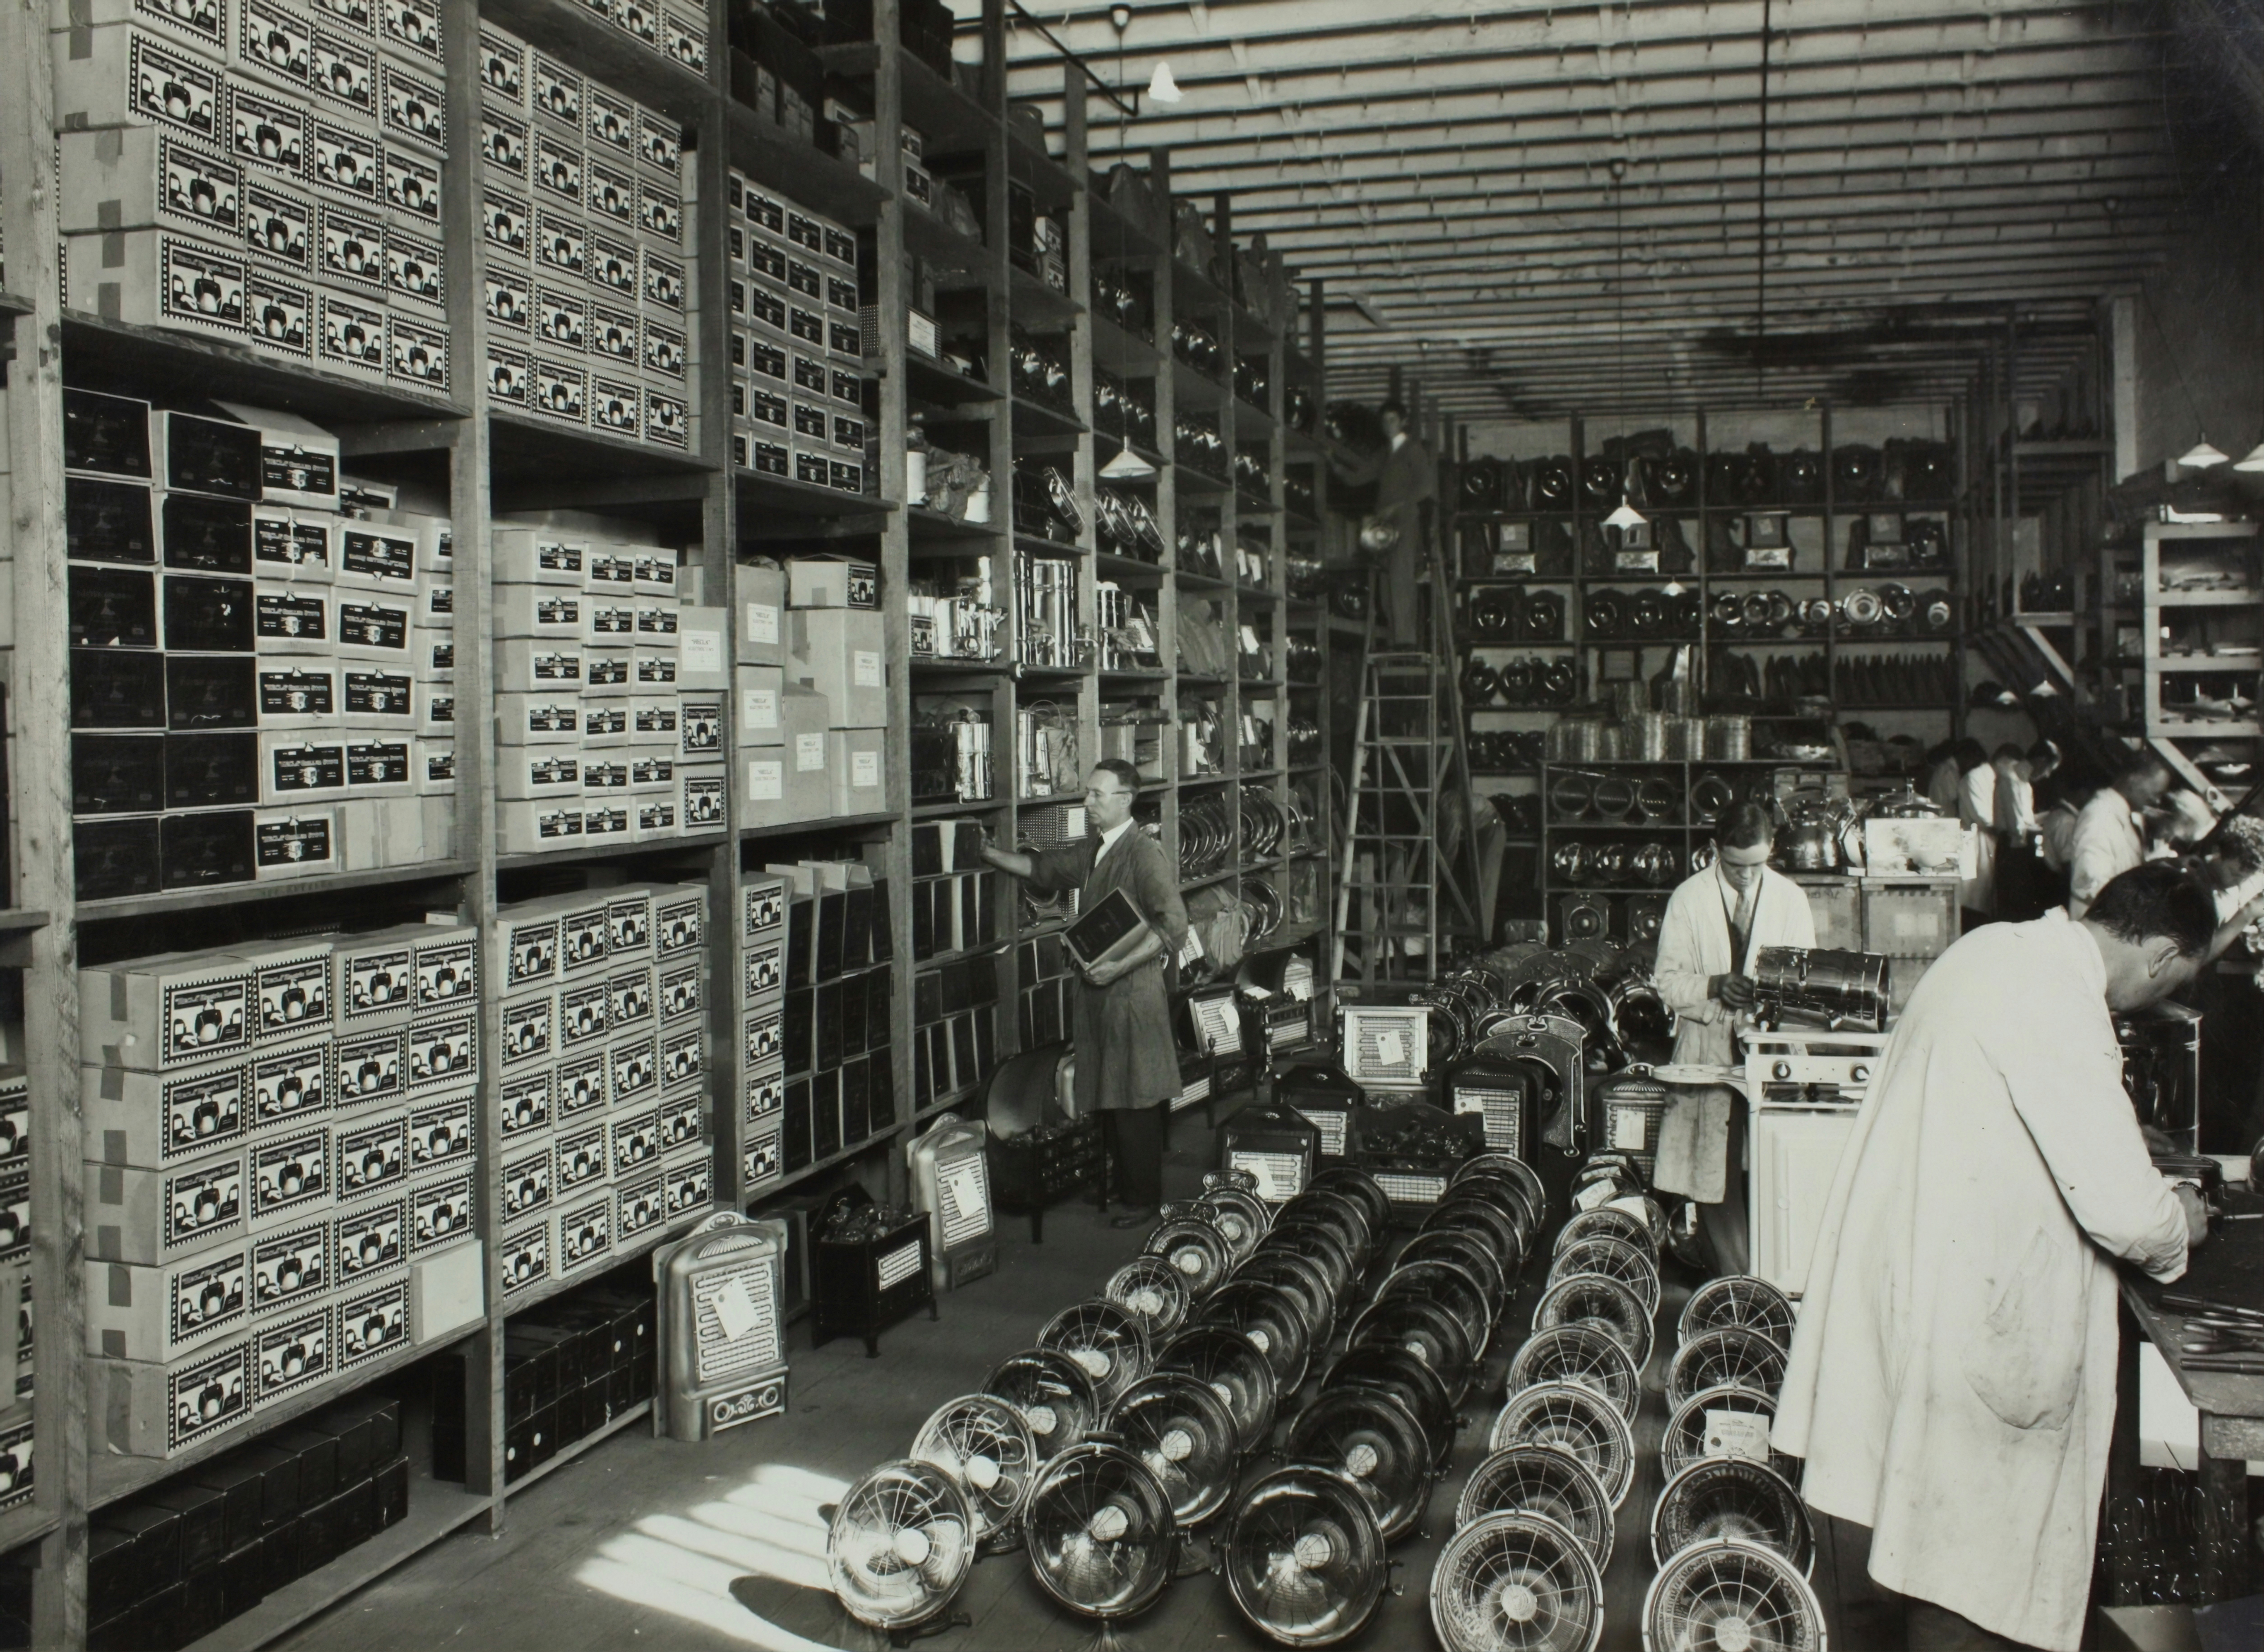 Hecla Electrics Pty Ltd, Workers Assembling Electrical Products, circa 1930